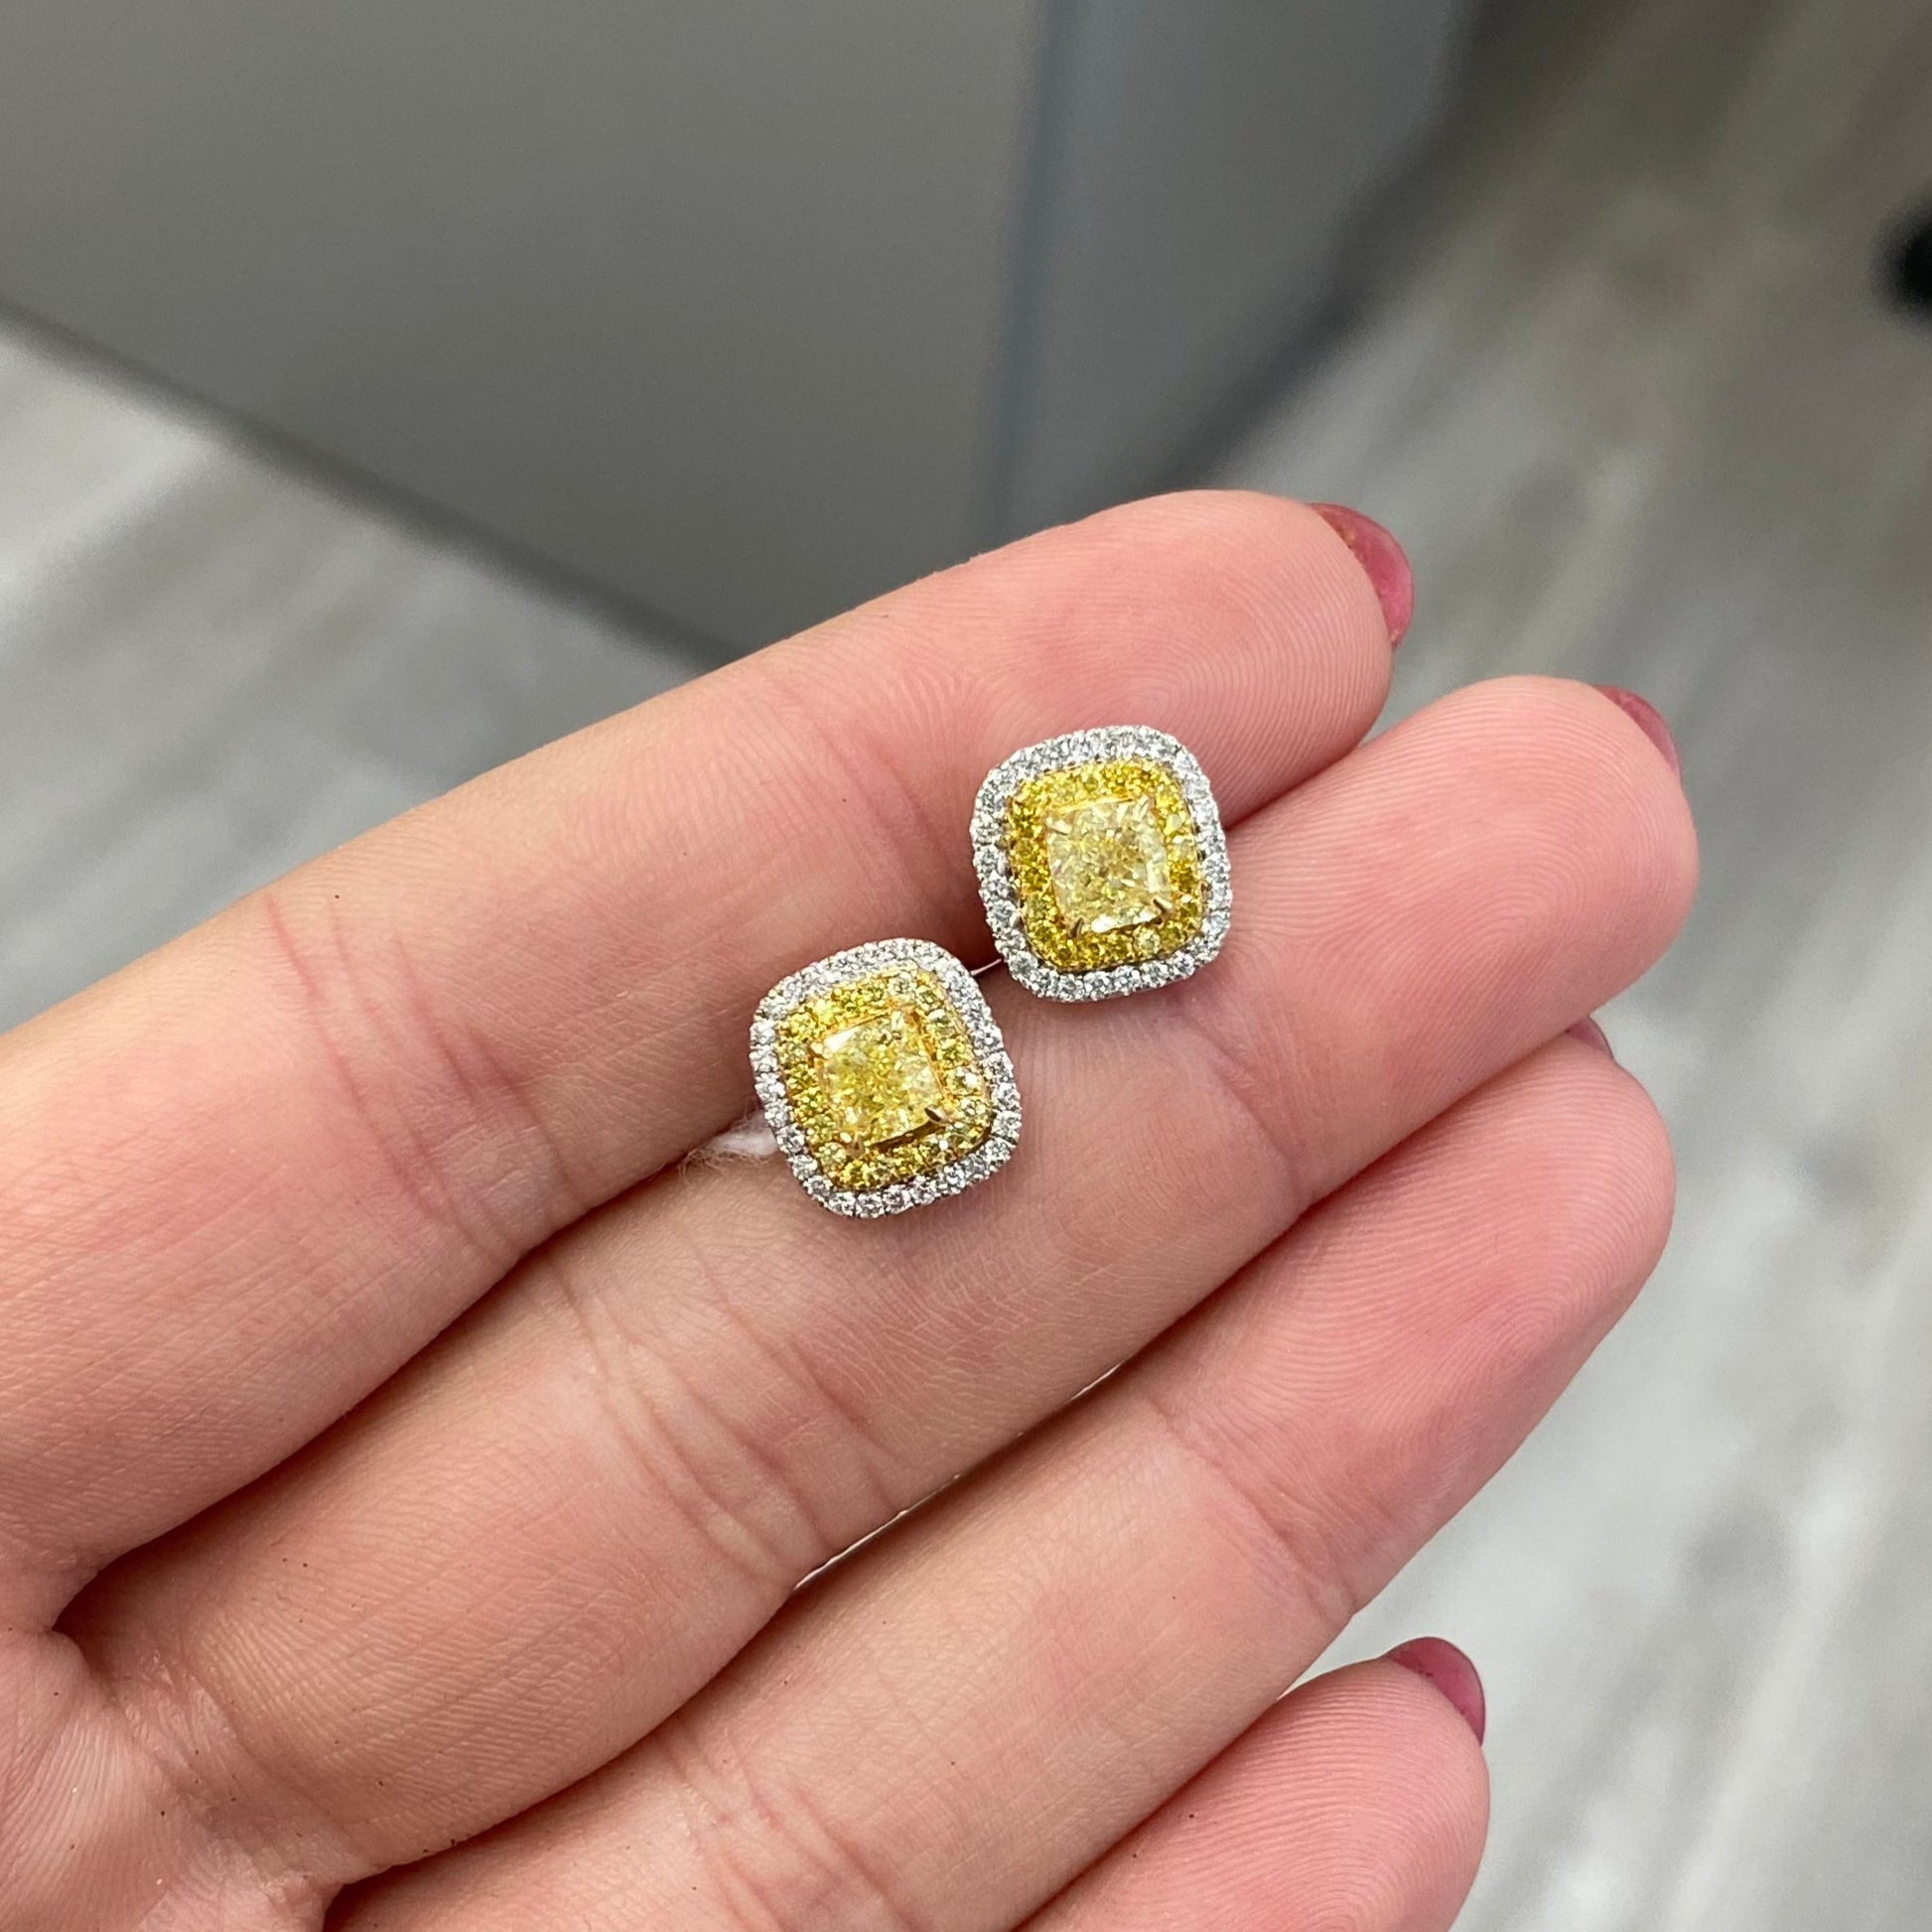 Classic diamond studs made bolder. In the center a vibrant fancy yellow cushion surrounded by a double halo. Fancy Yellow Cushion Studs 1.38 carat total diamond weight VS Clarity Center diamonds are 0.50ct each Surrounded by fancy yellow and white diamond. Set in 18k Gold